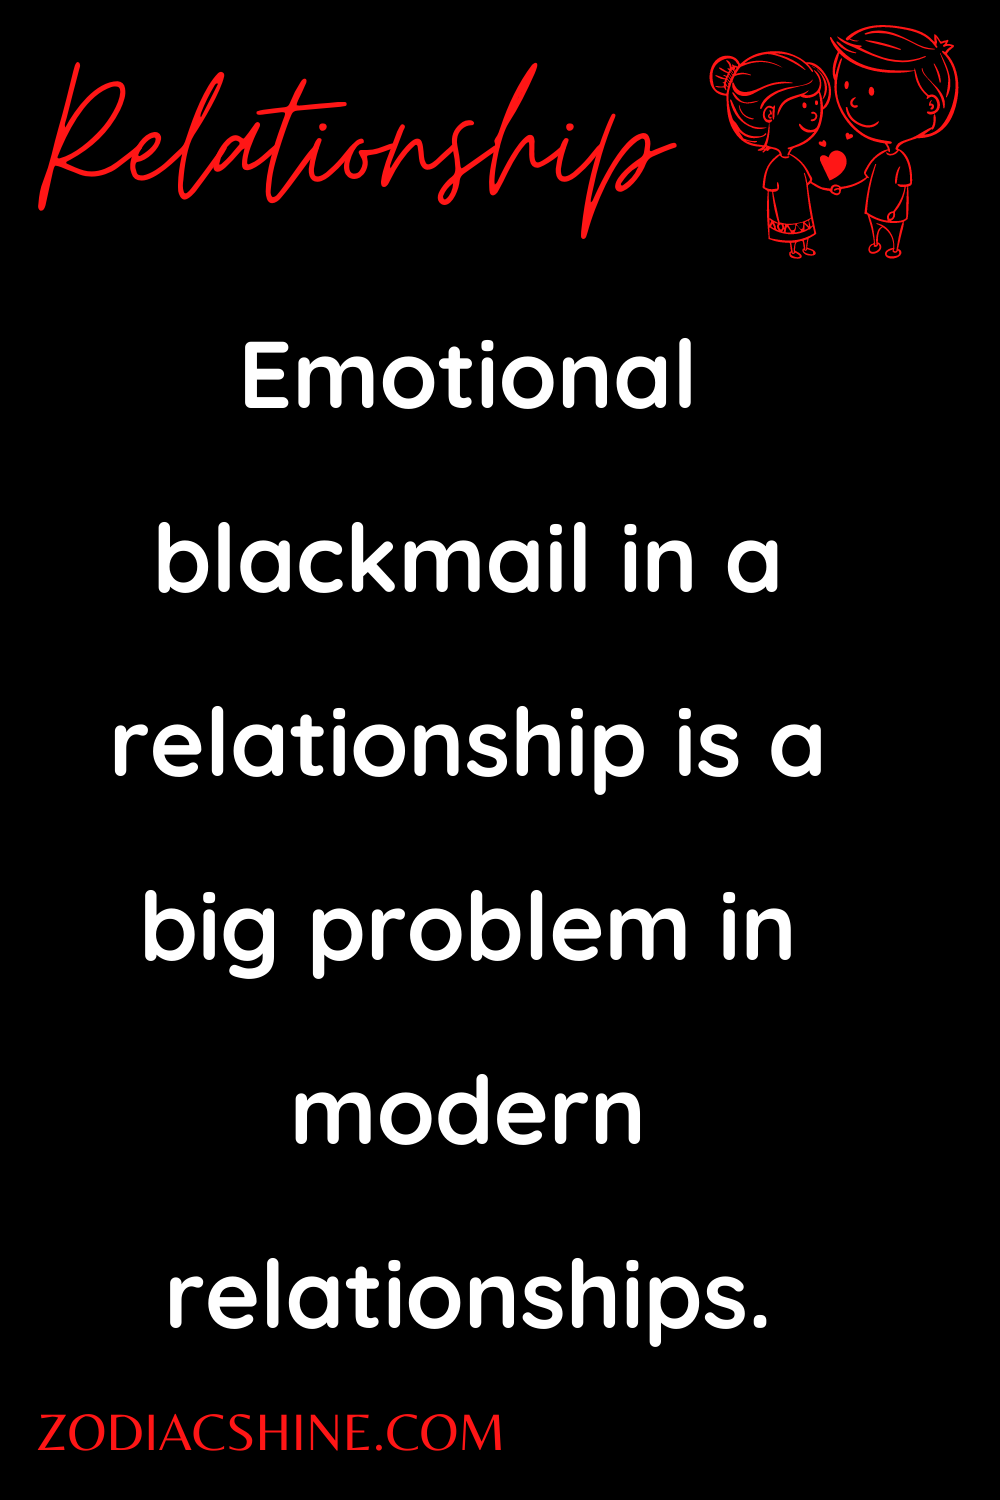 Emotional blackmail in a relationship is a big problem in modern relationships.